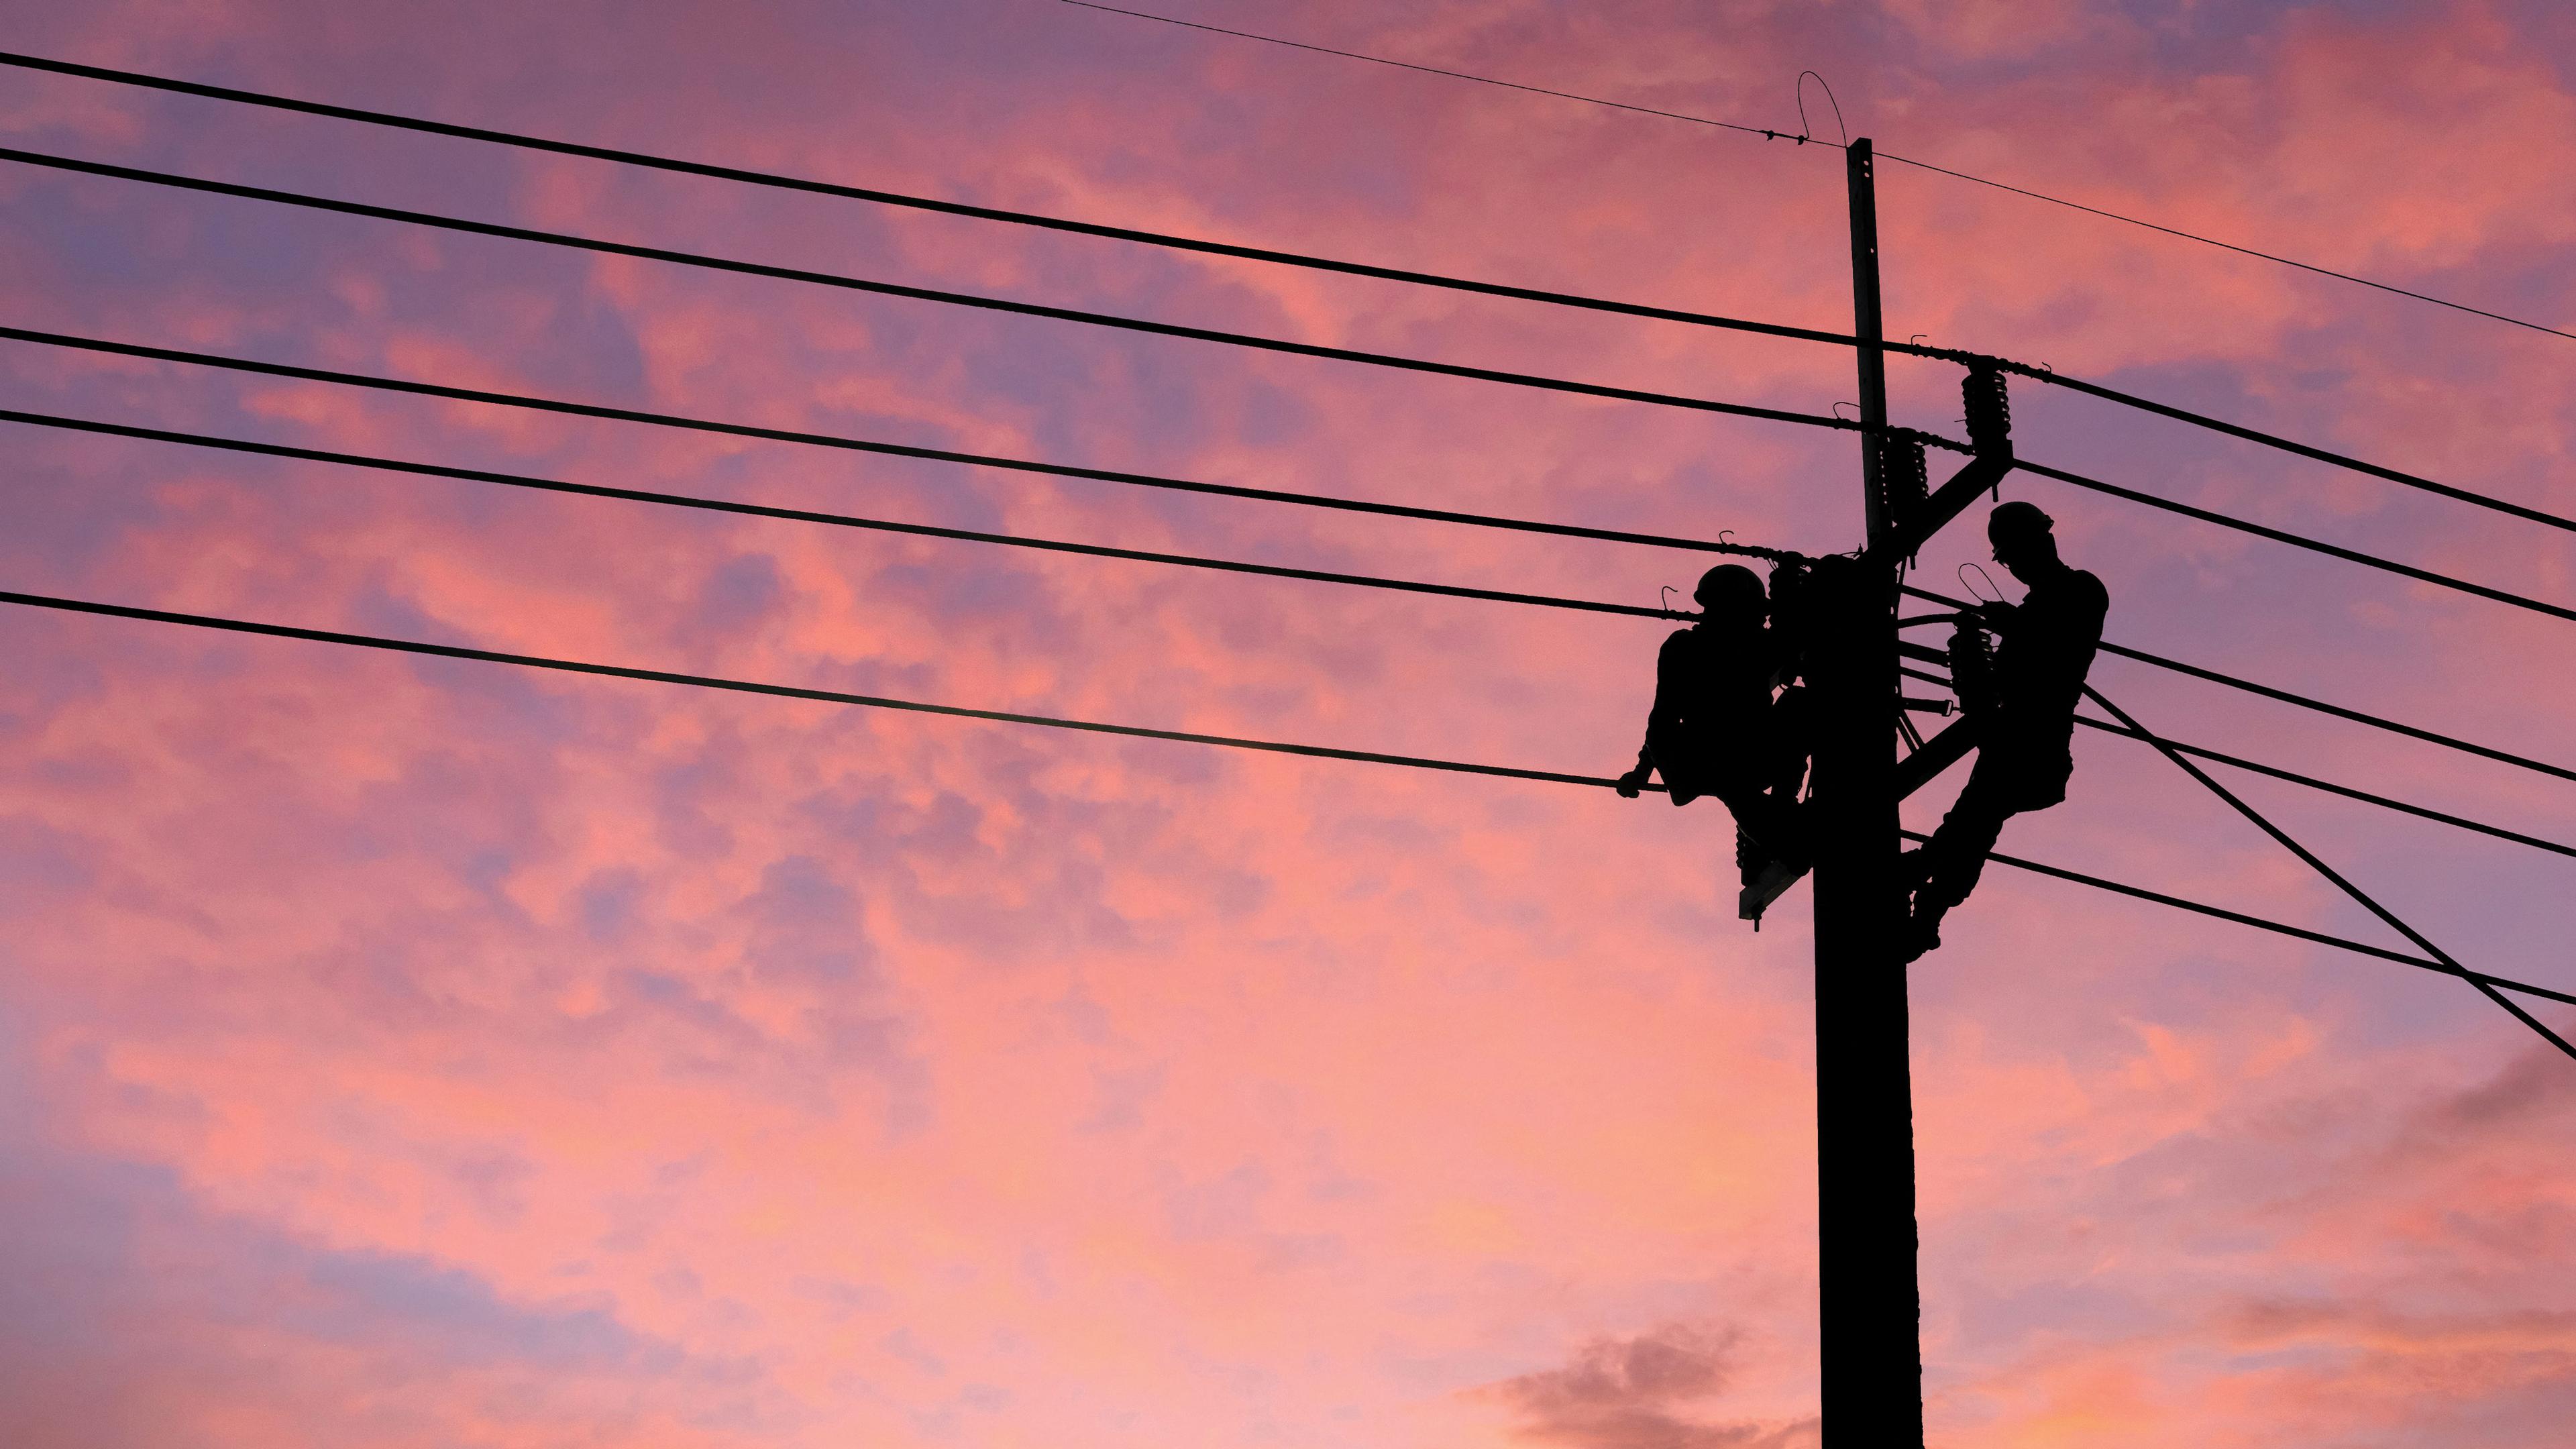 Two workers on a utility pole